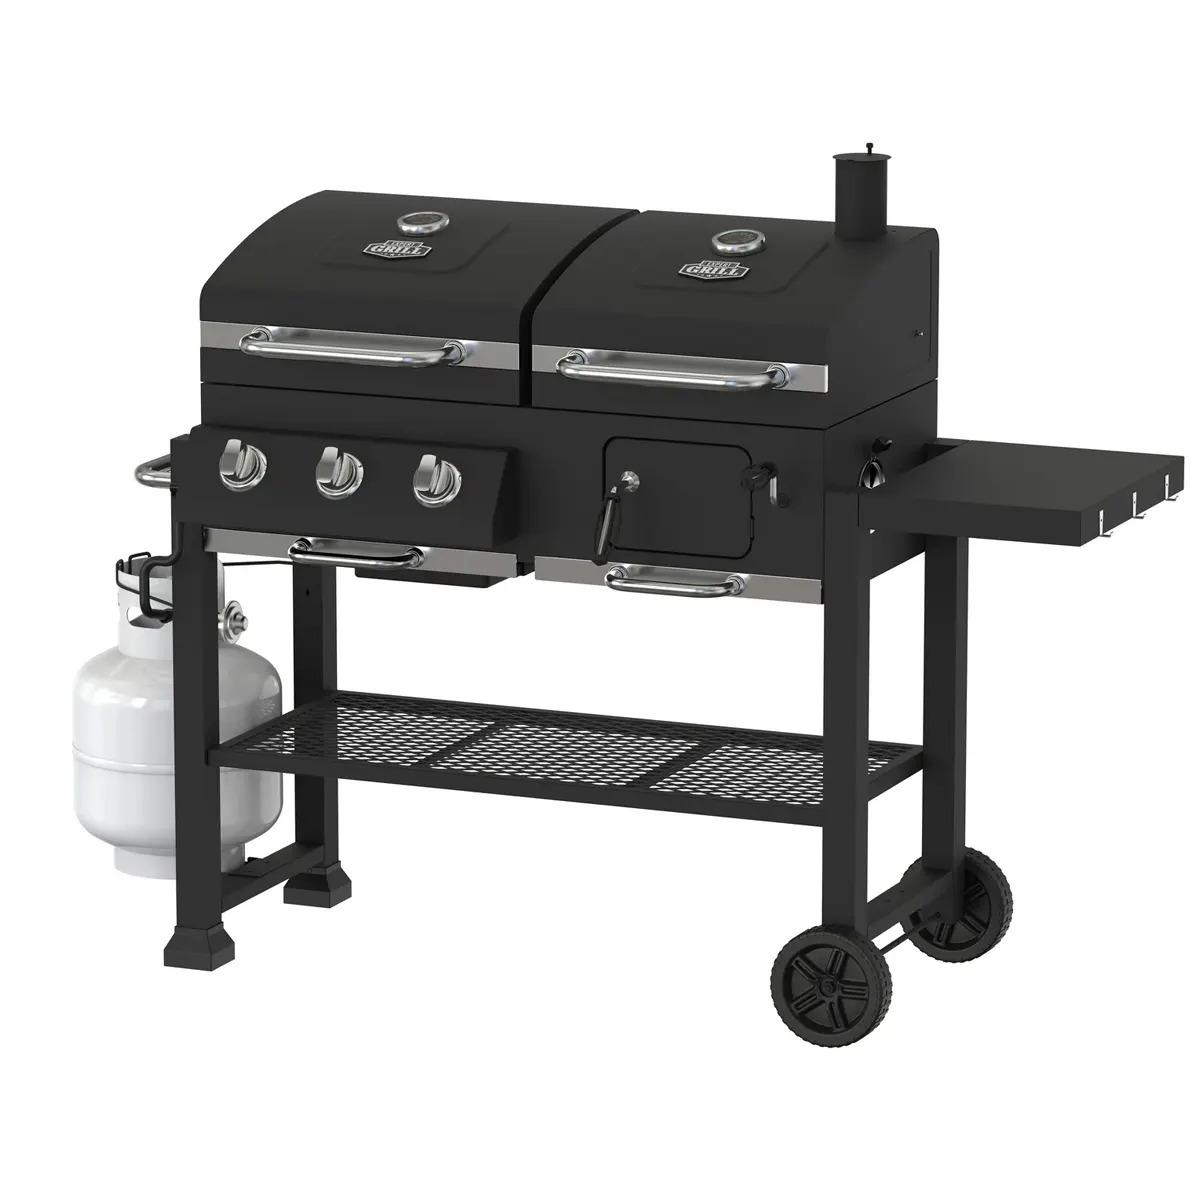 Expert Grill 3 Burner 2-in-1 Dual Fuel Gas and Charcoal Combo Grill for $147 Shipped